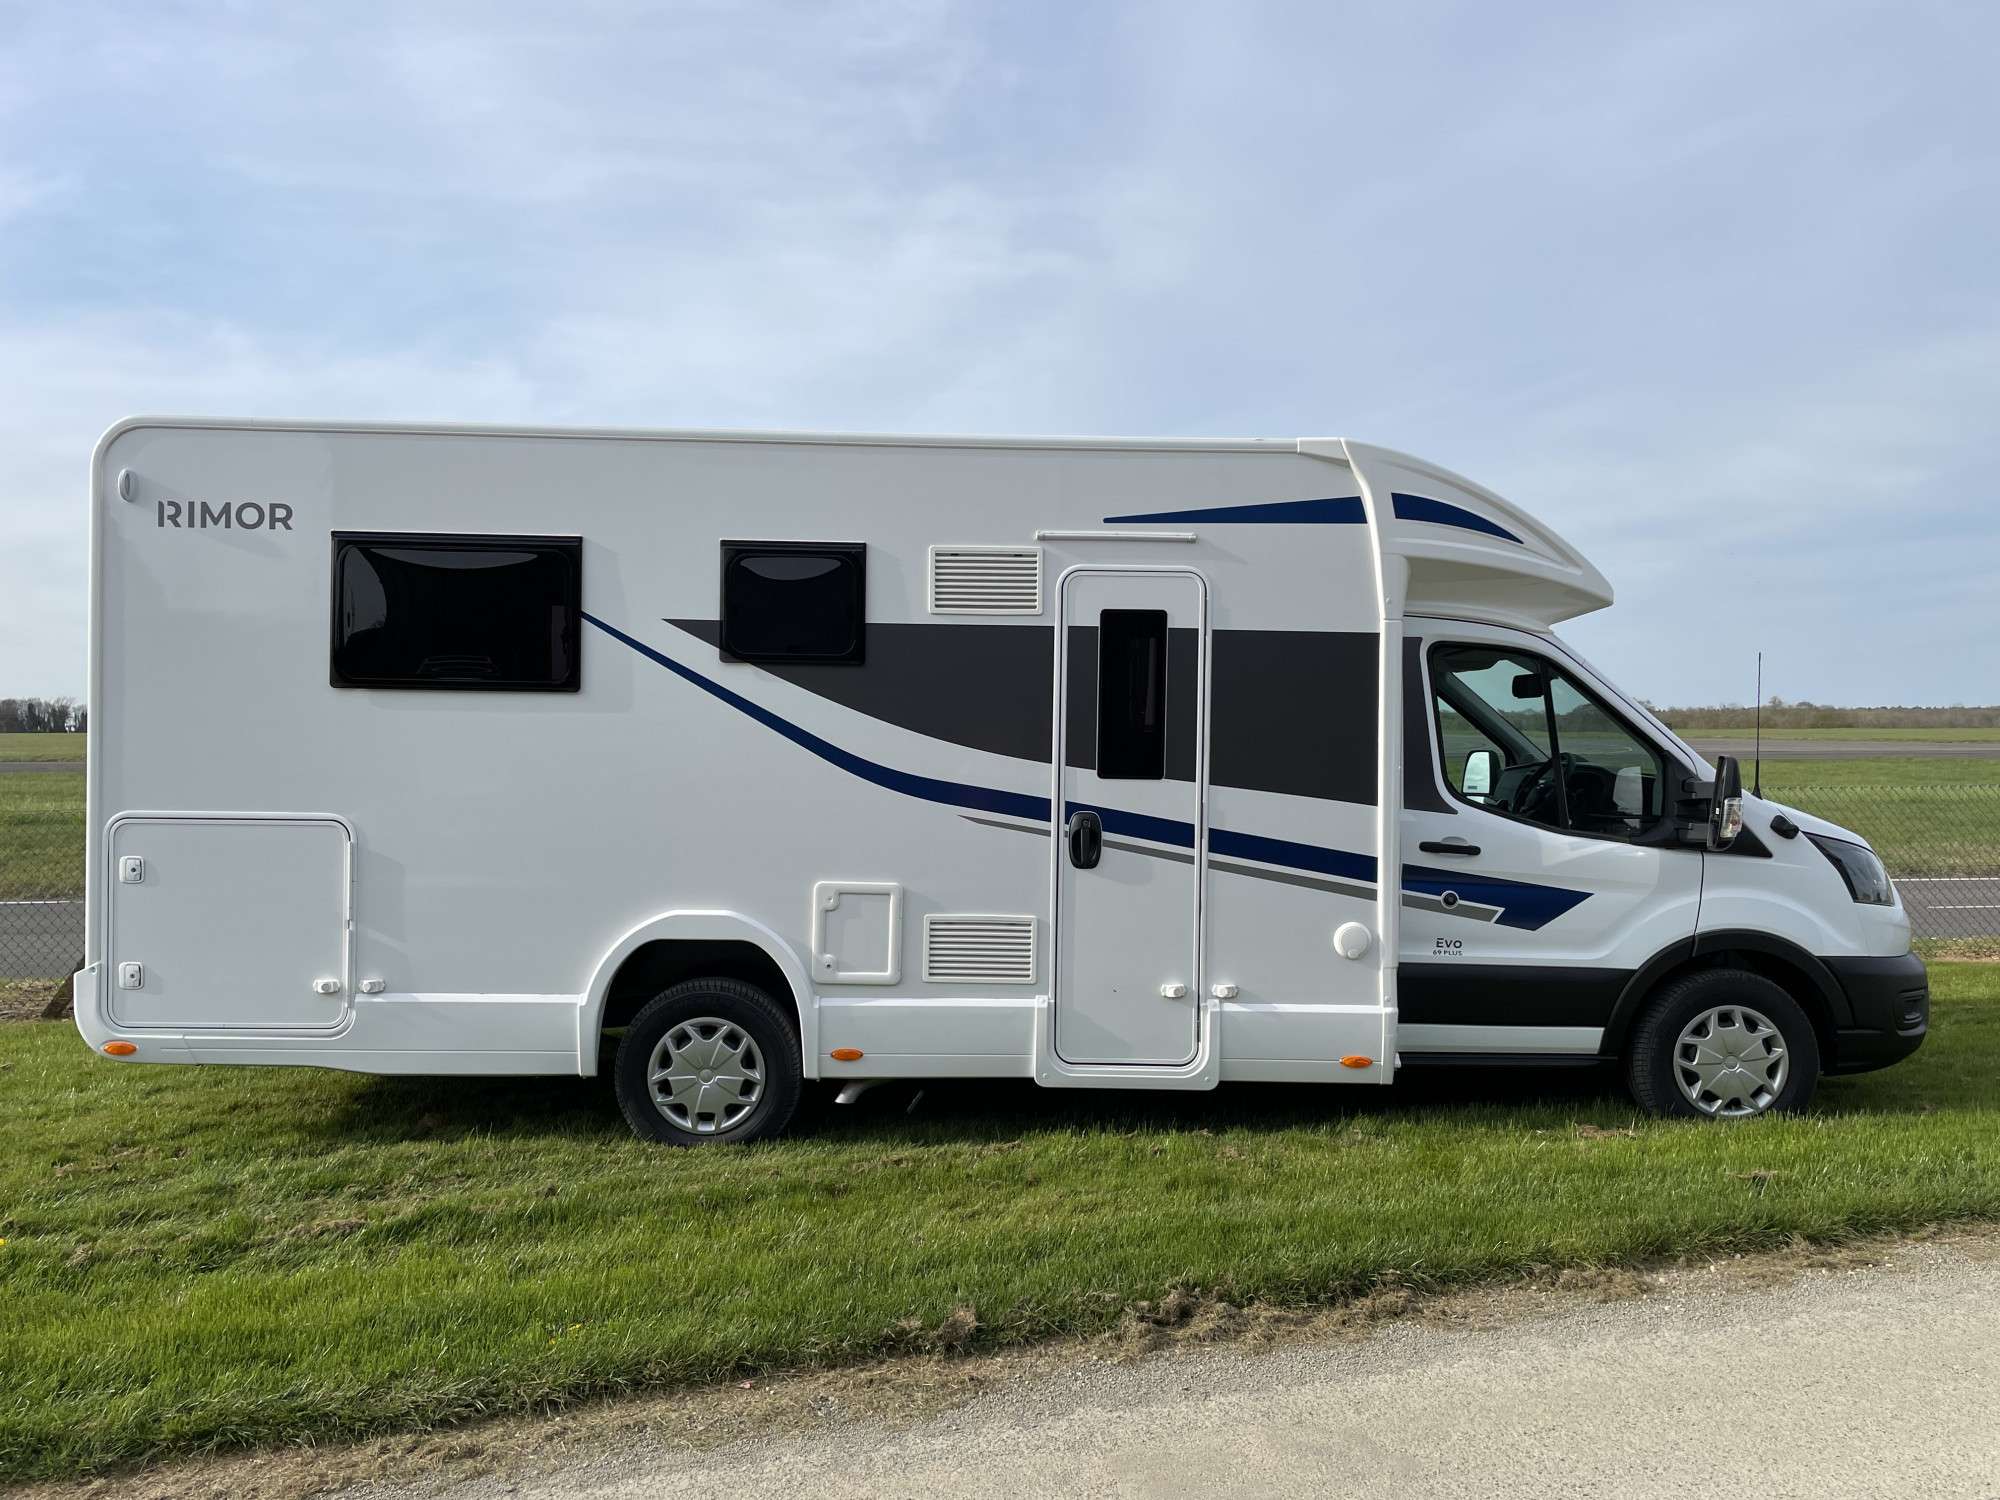 A Rimor Motorhome called Rimor-Evo-p-plus and for hire in Peterborough, England